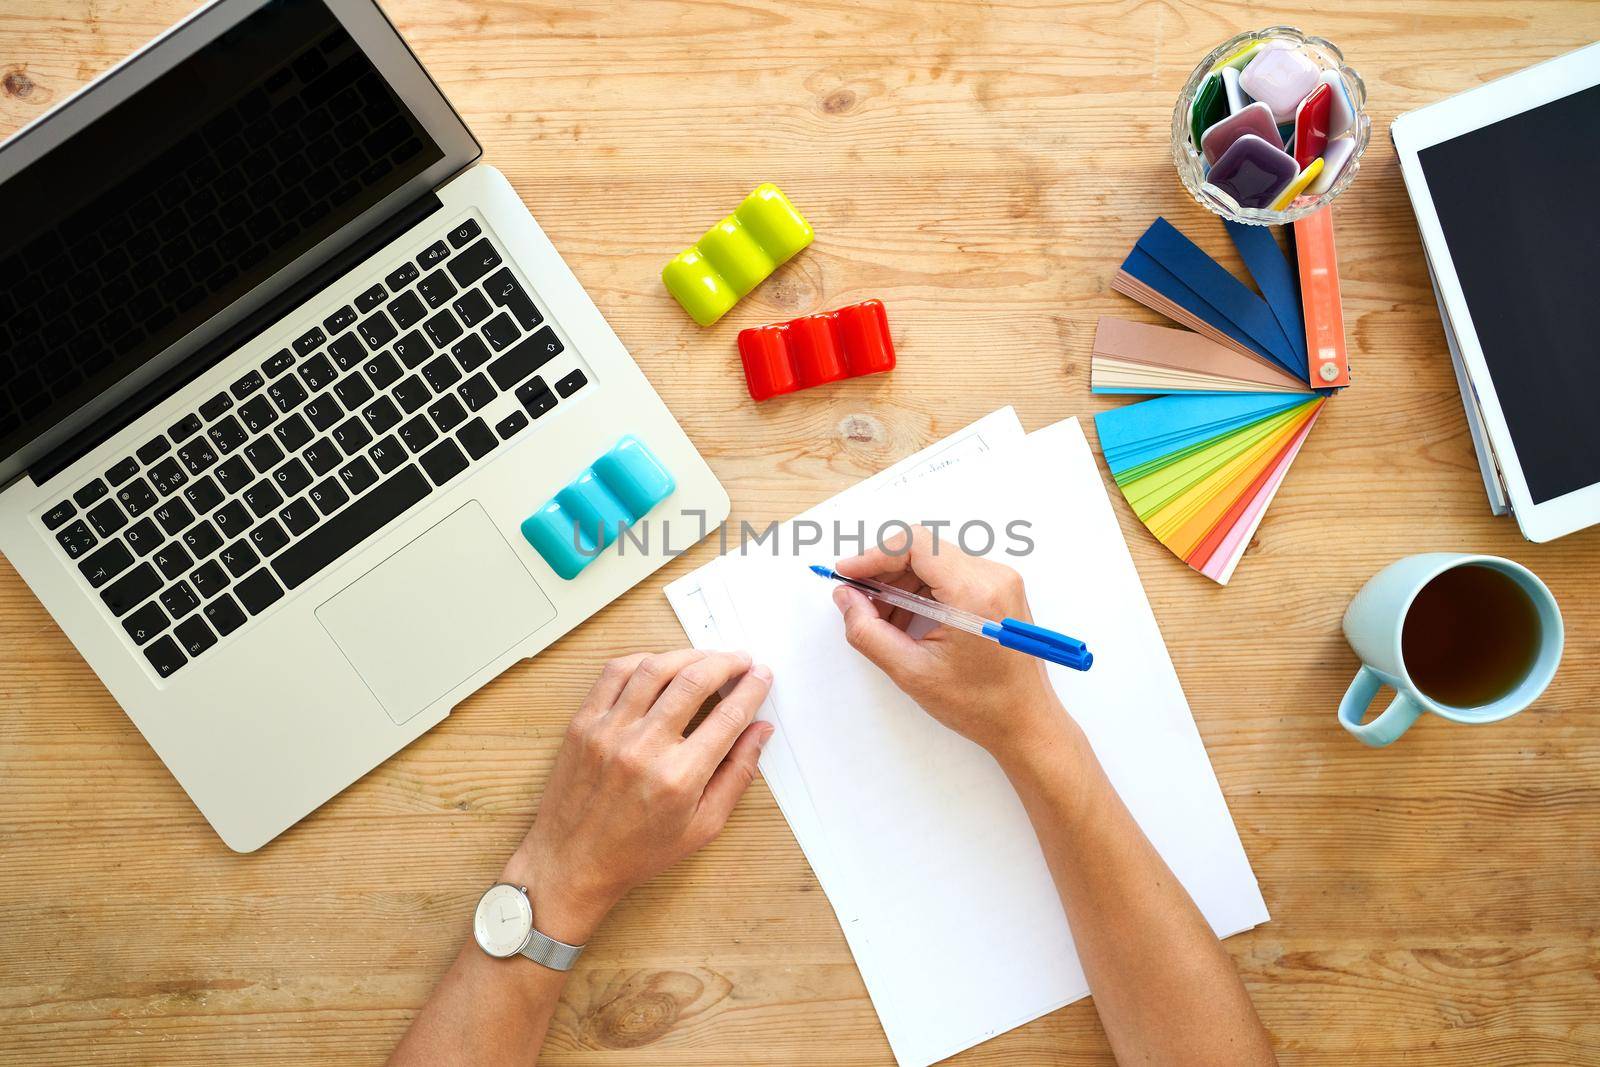 Designer workplace, top view. Home office - desk with laptop, hands with colourful set, color palette selection. Digital tablet and blank white paper for writing